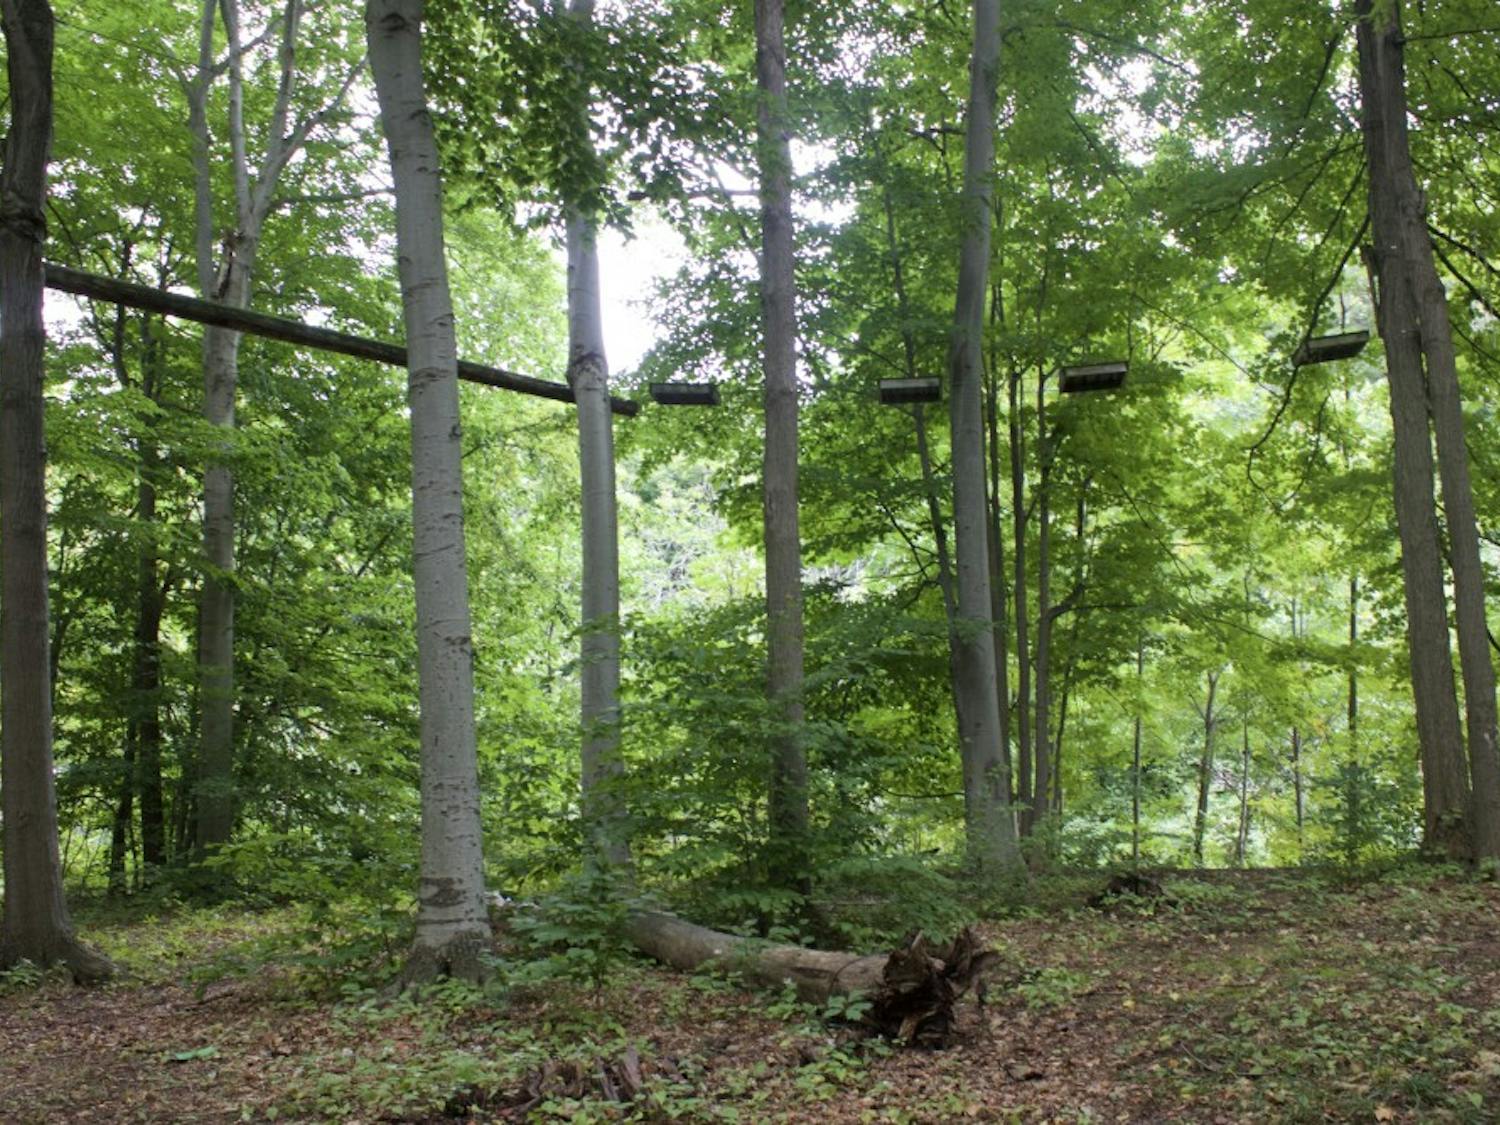 A ropes course is on UB land next to Sweet Home Senior High School. Both schools have plans to see the course taken down, but no dates are set yet.